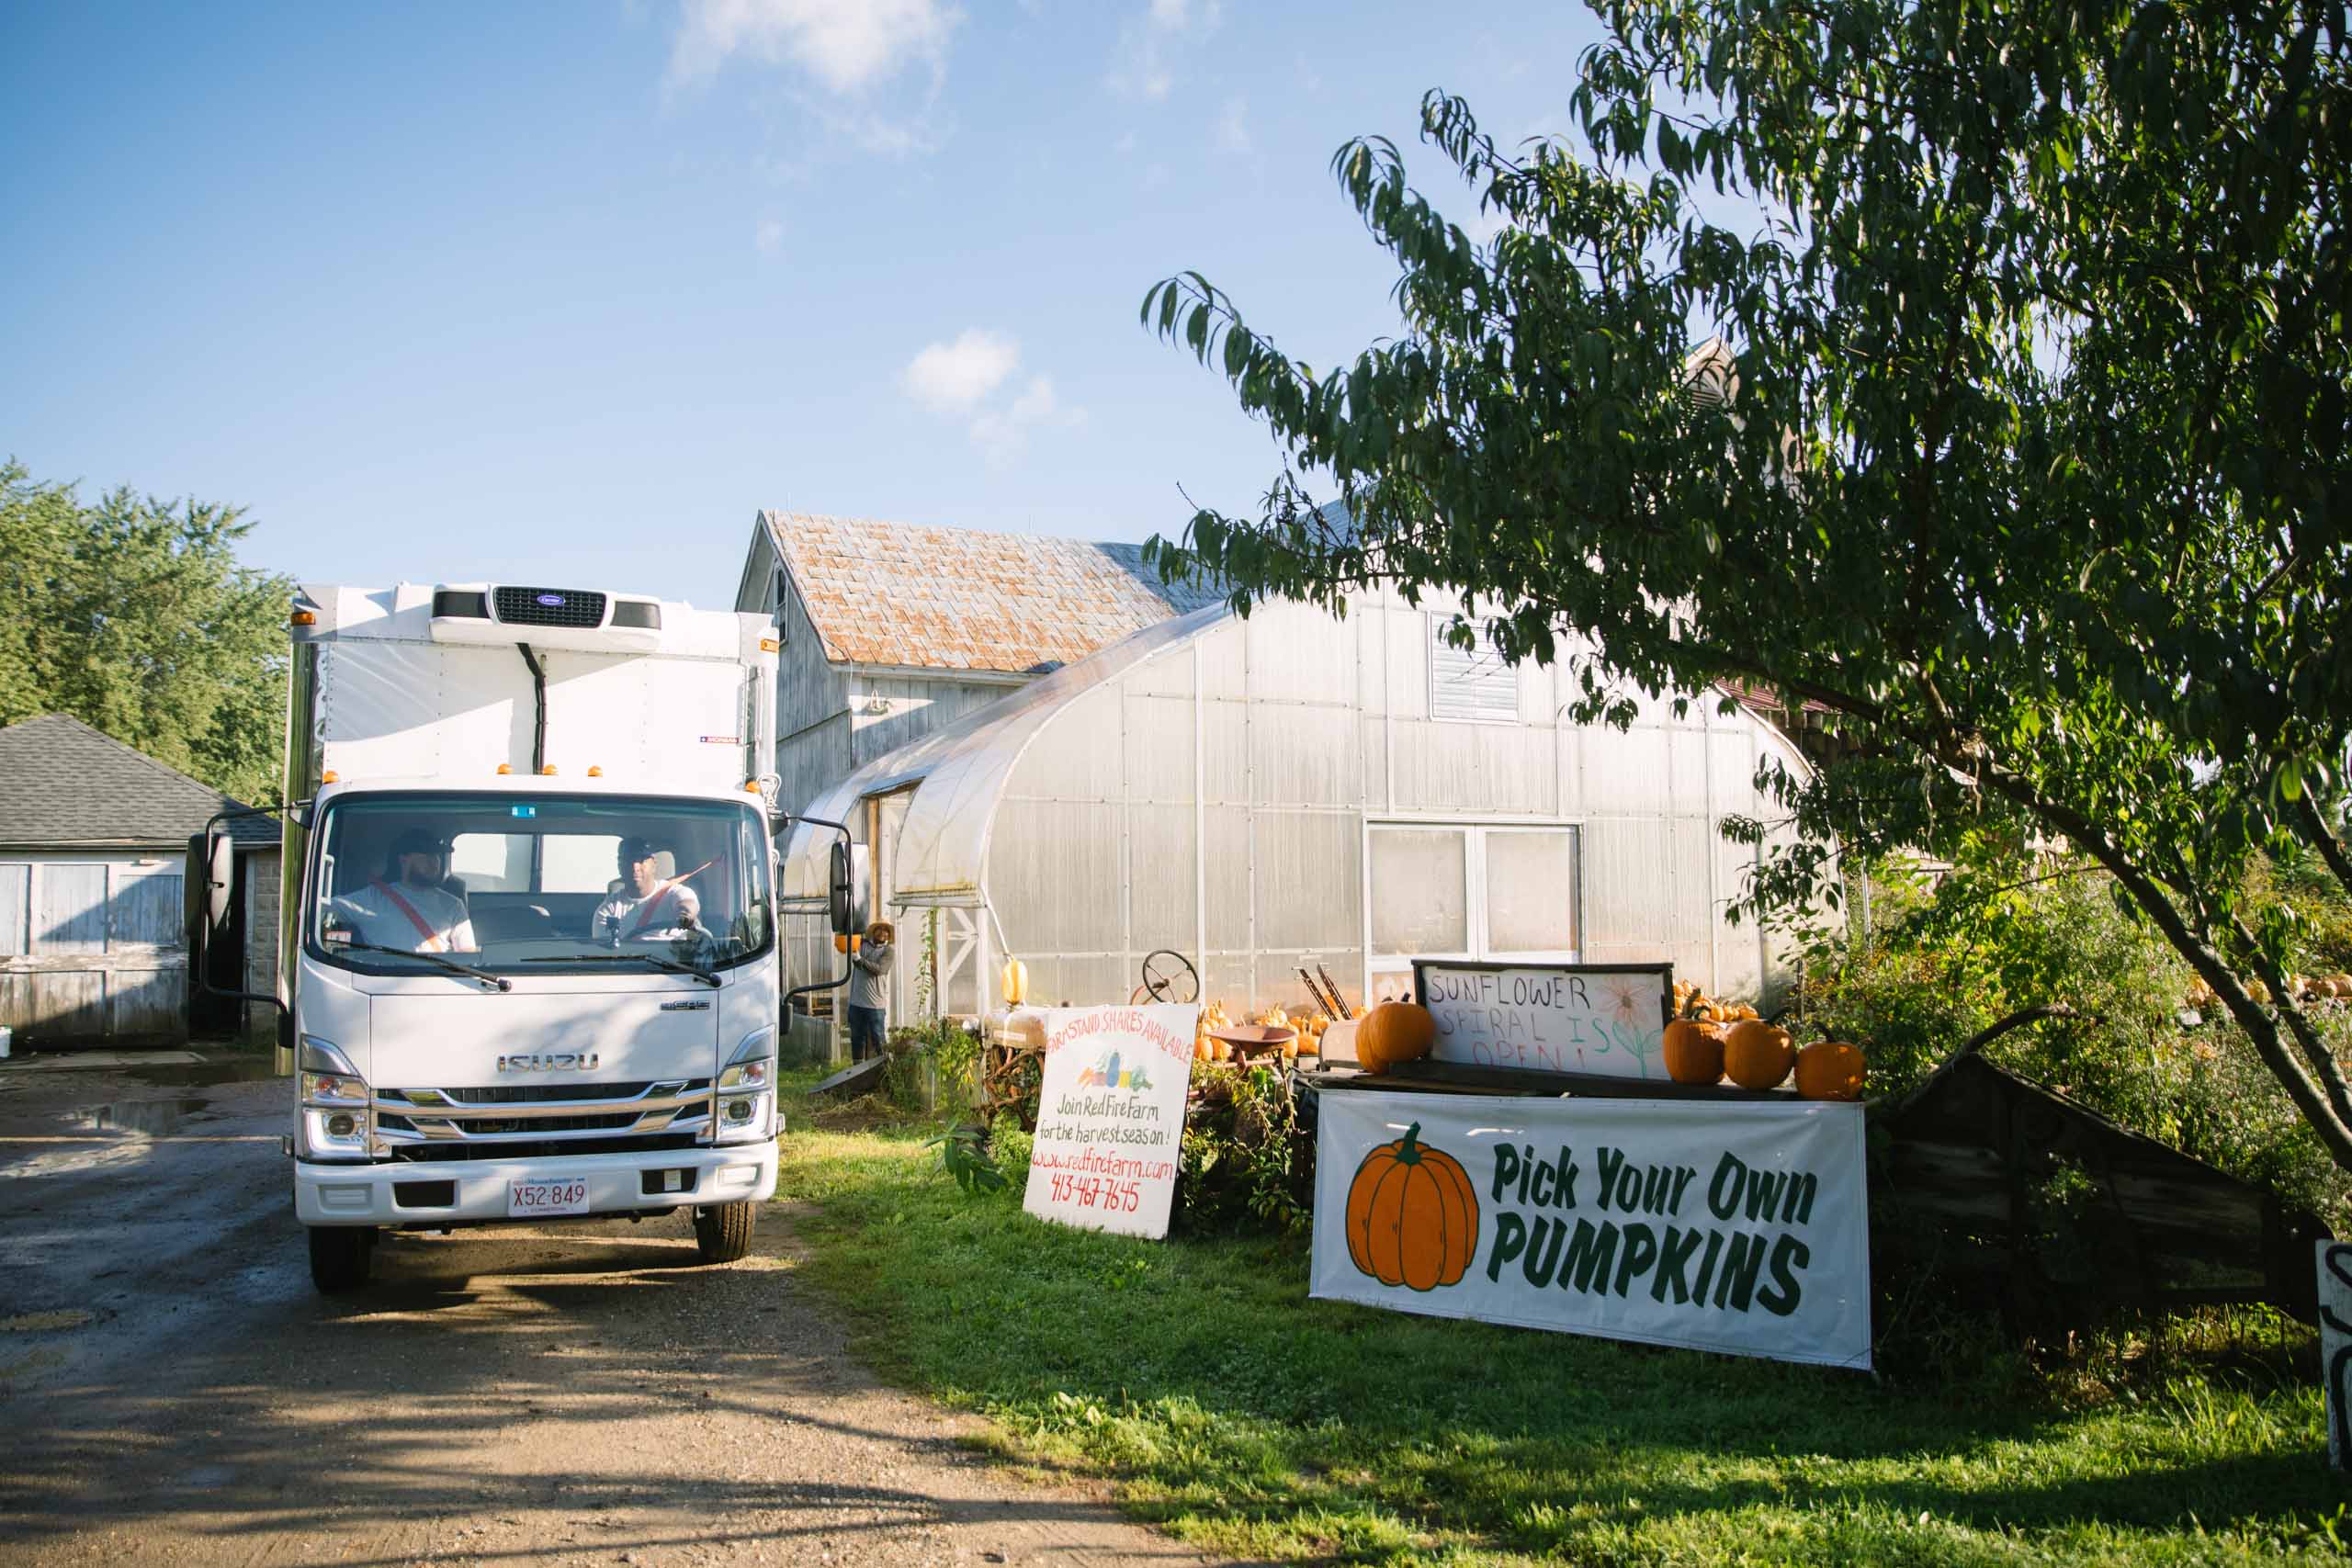 Two men in a white truck parked on a dirt road at a farm picking up pumpkins donated to Boston area food recovery organization Lovin Spoonfuls.